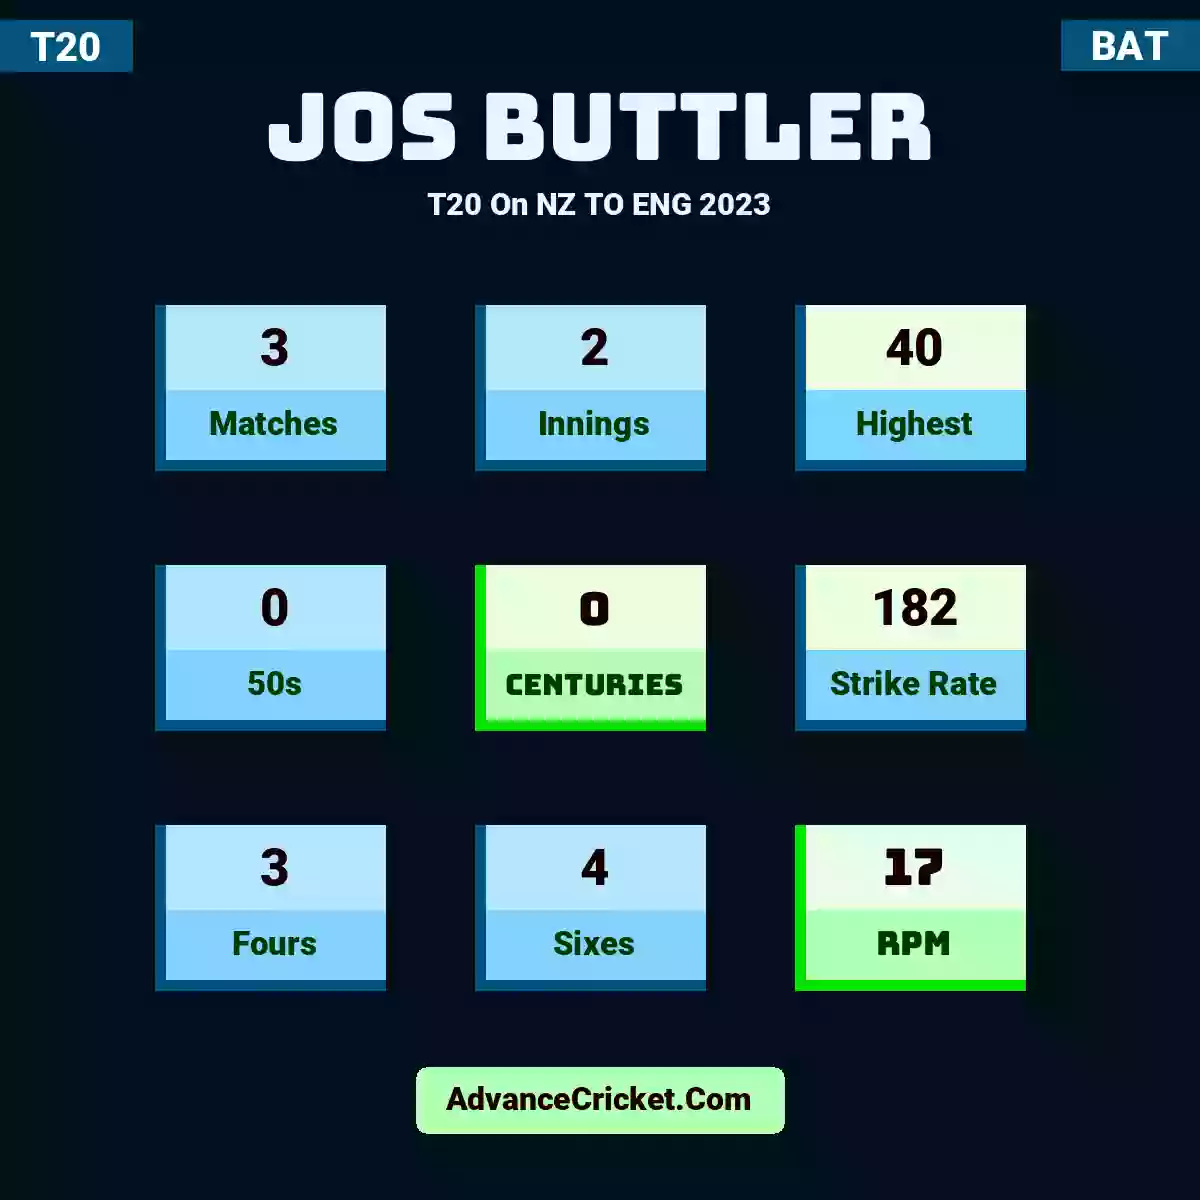 Jos Buttler T20  On NZ TO ENG 2023, Jos Buttler played 3 matches, scored 40 runs as highest, 0 half-centuries, and 0 centuries, with a strike rate of 182. J.Buttler hit 3 fours and 4 sixes, with an RPM of 17.